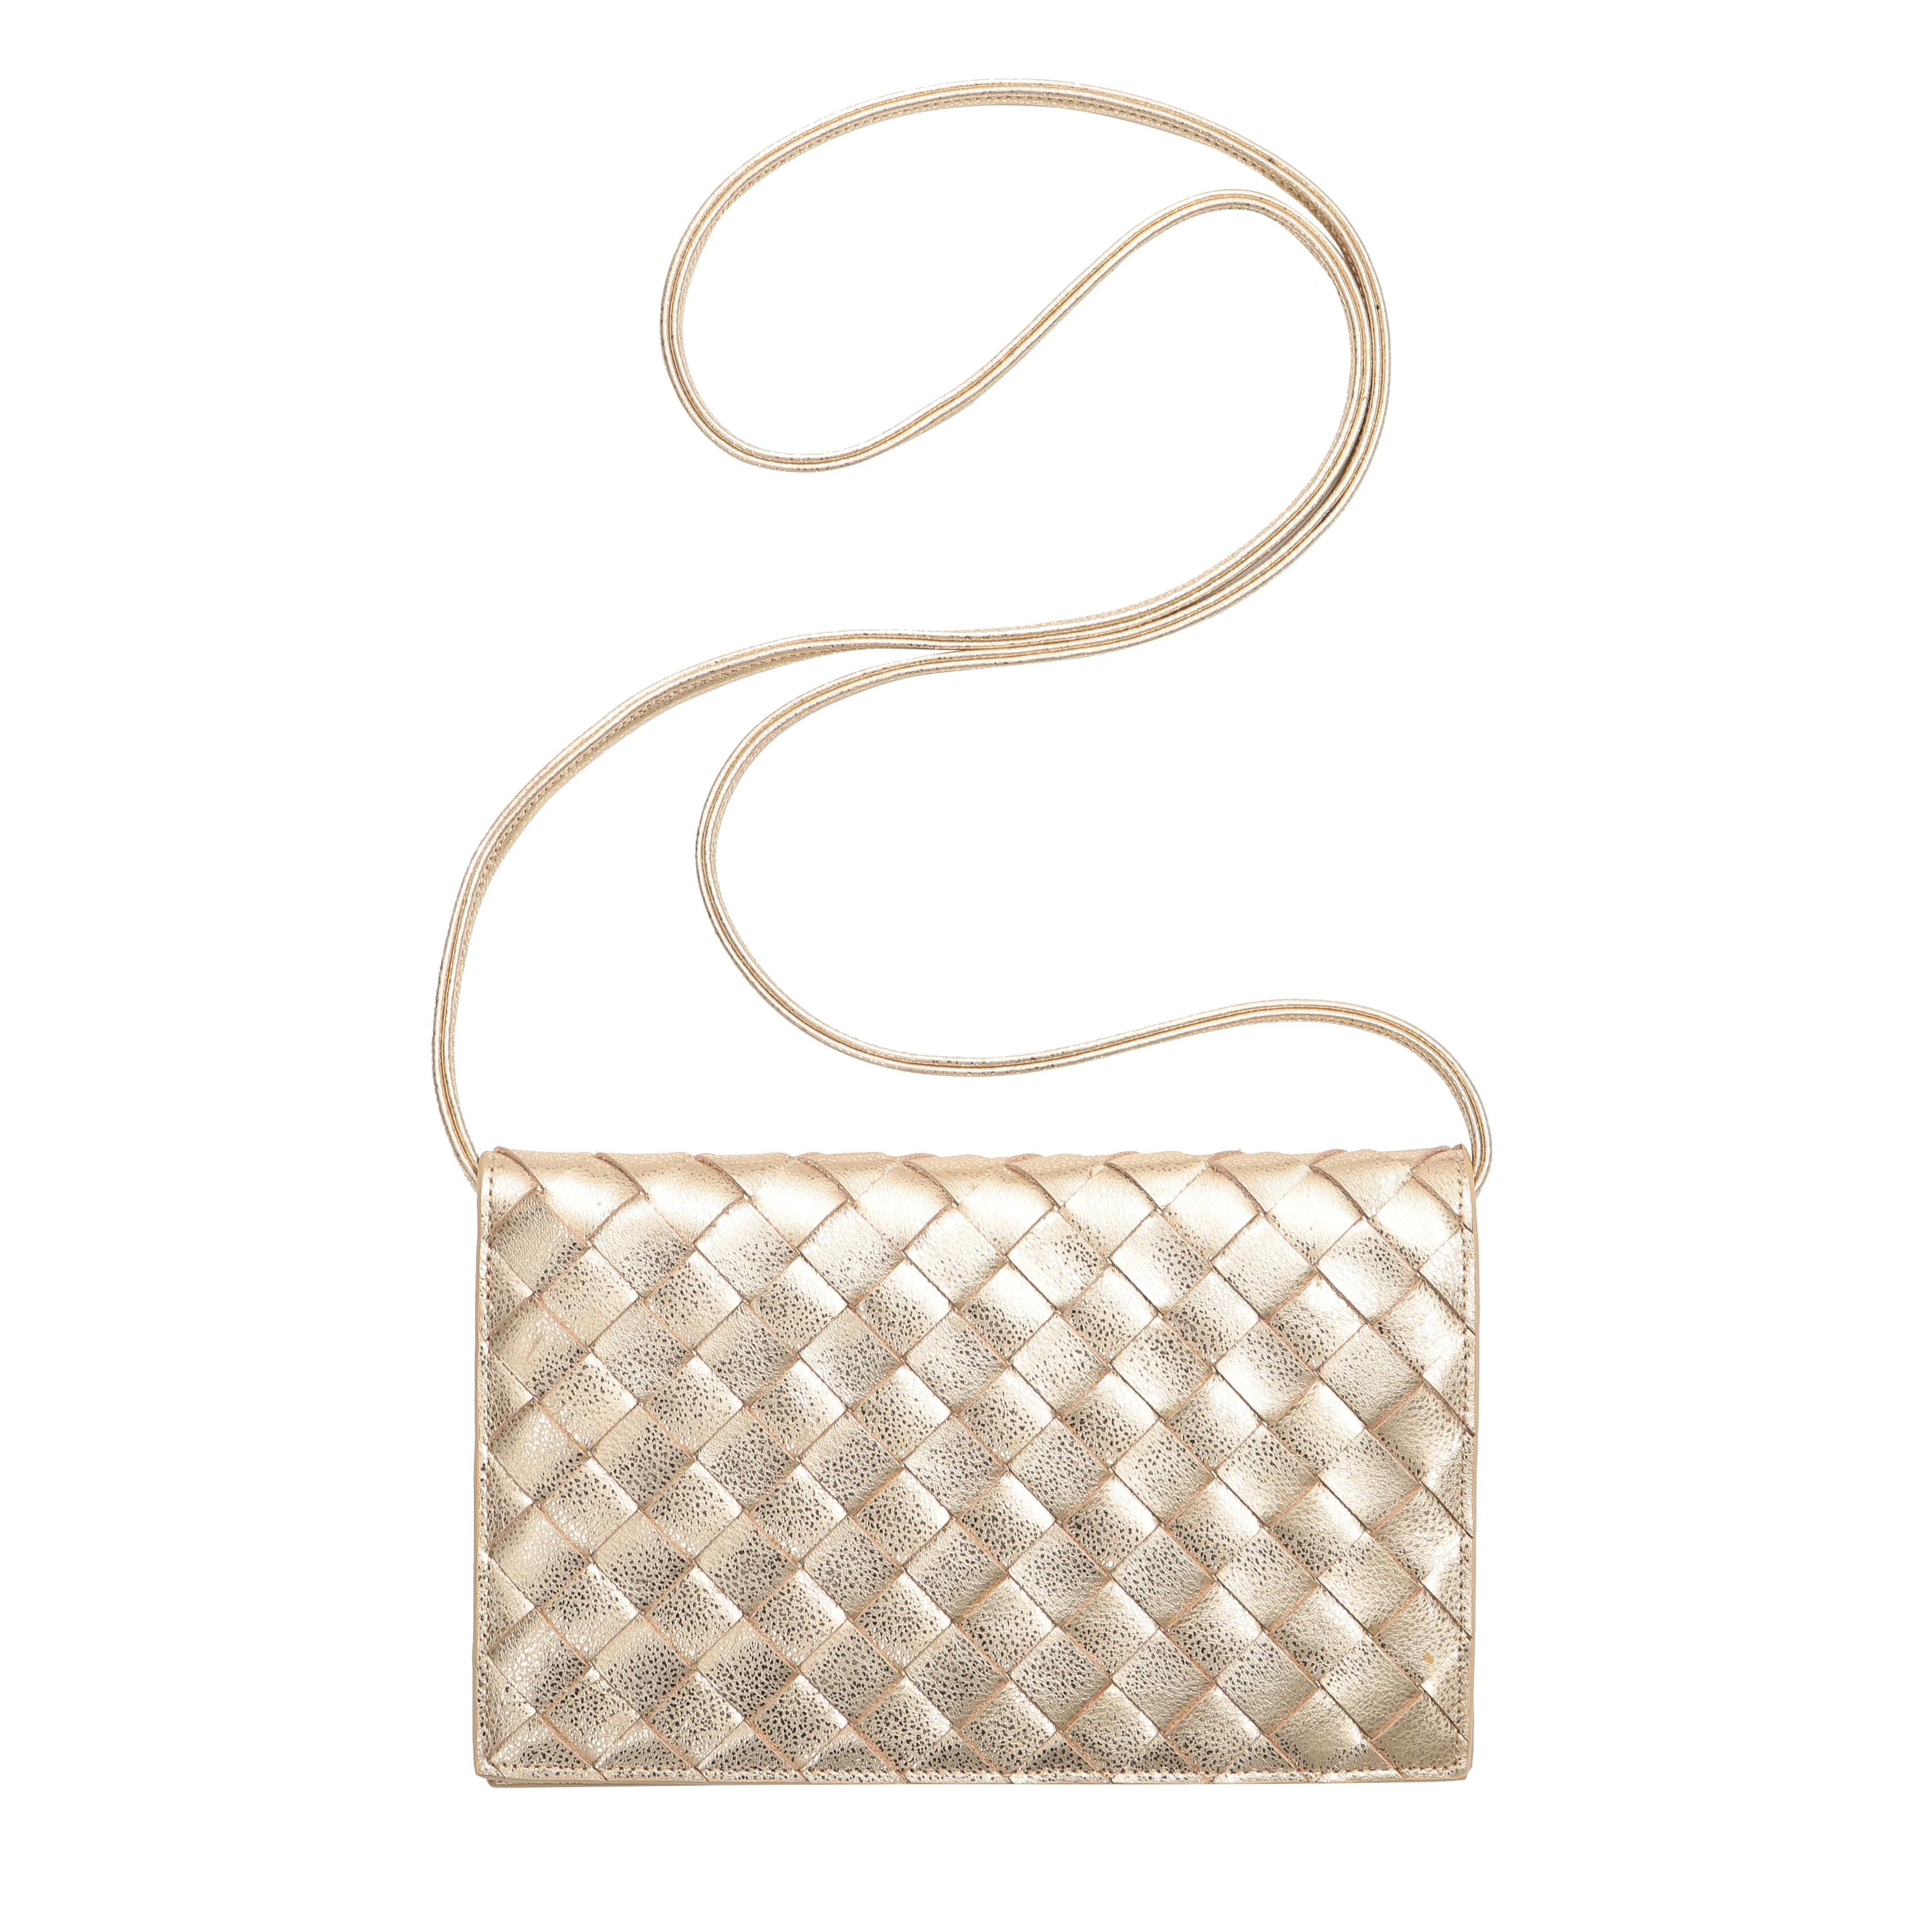 Sibby Crossbody Clutch in Gold Leather | KEVA Style